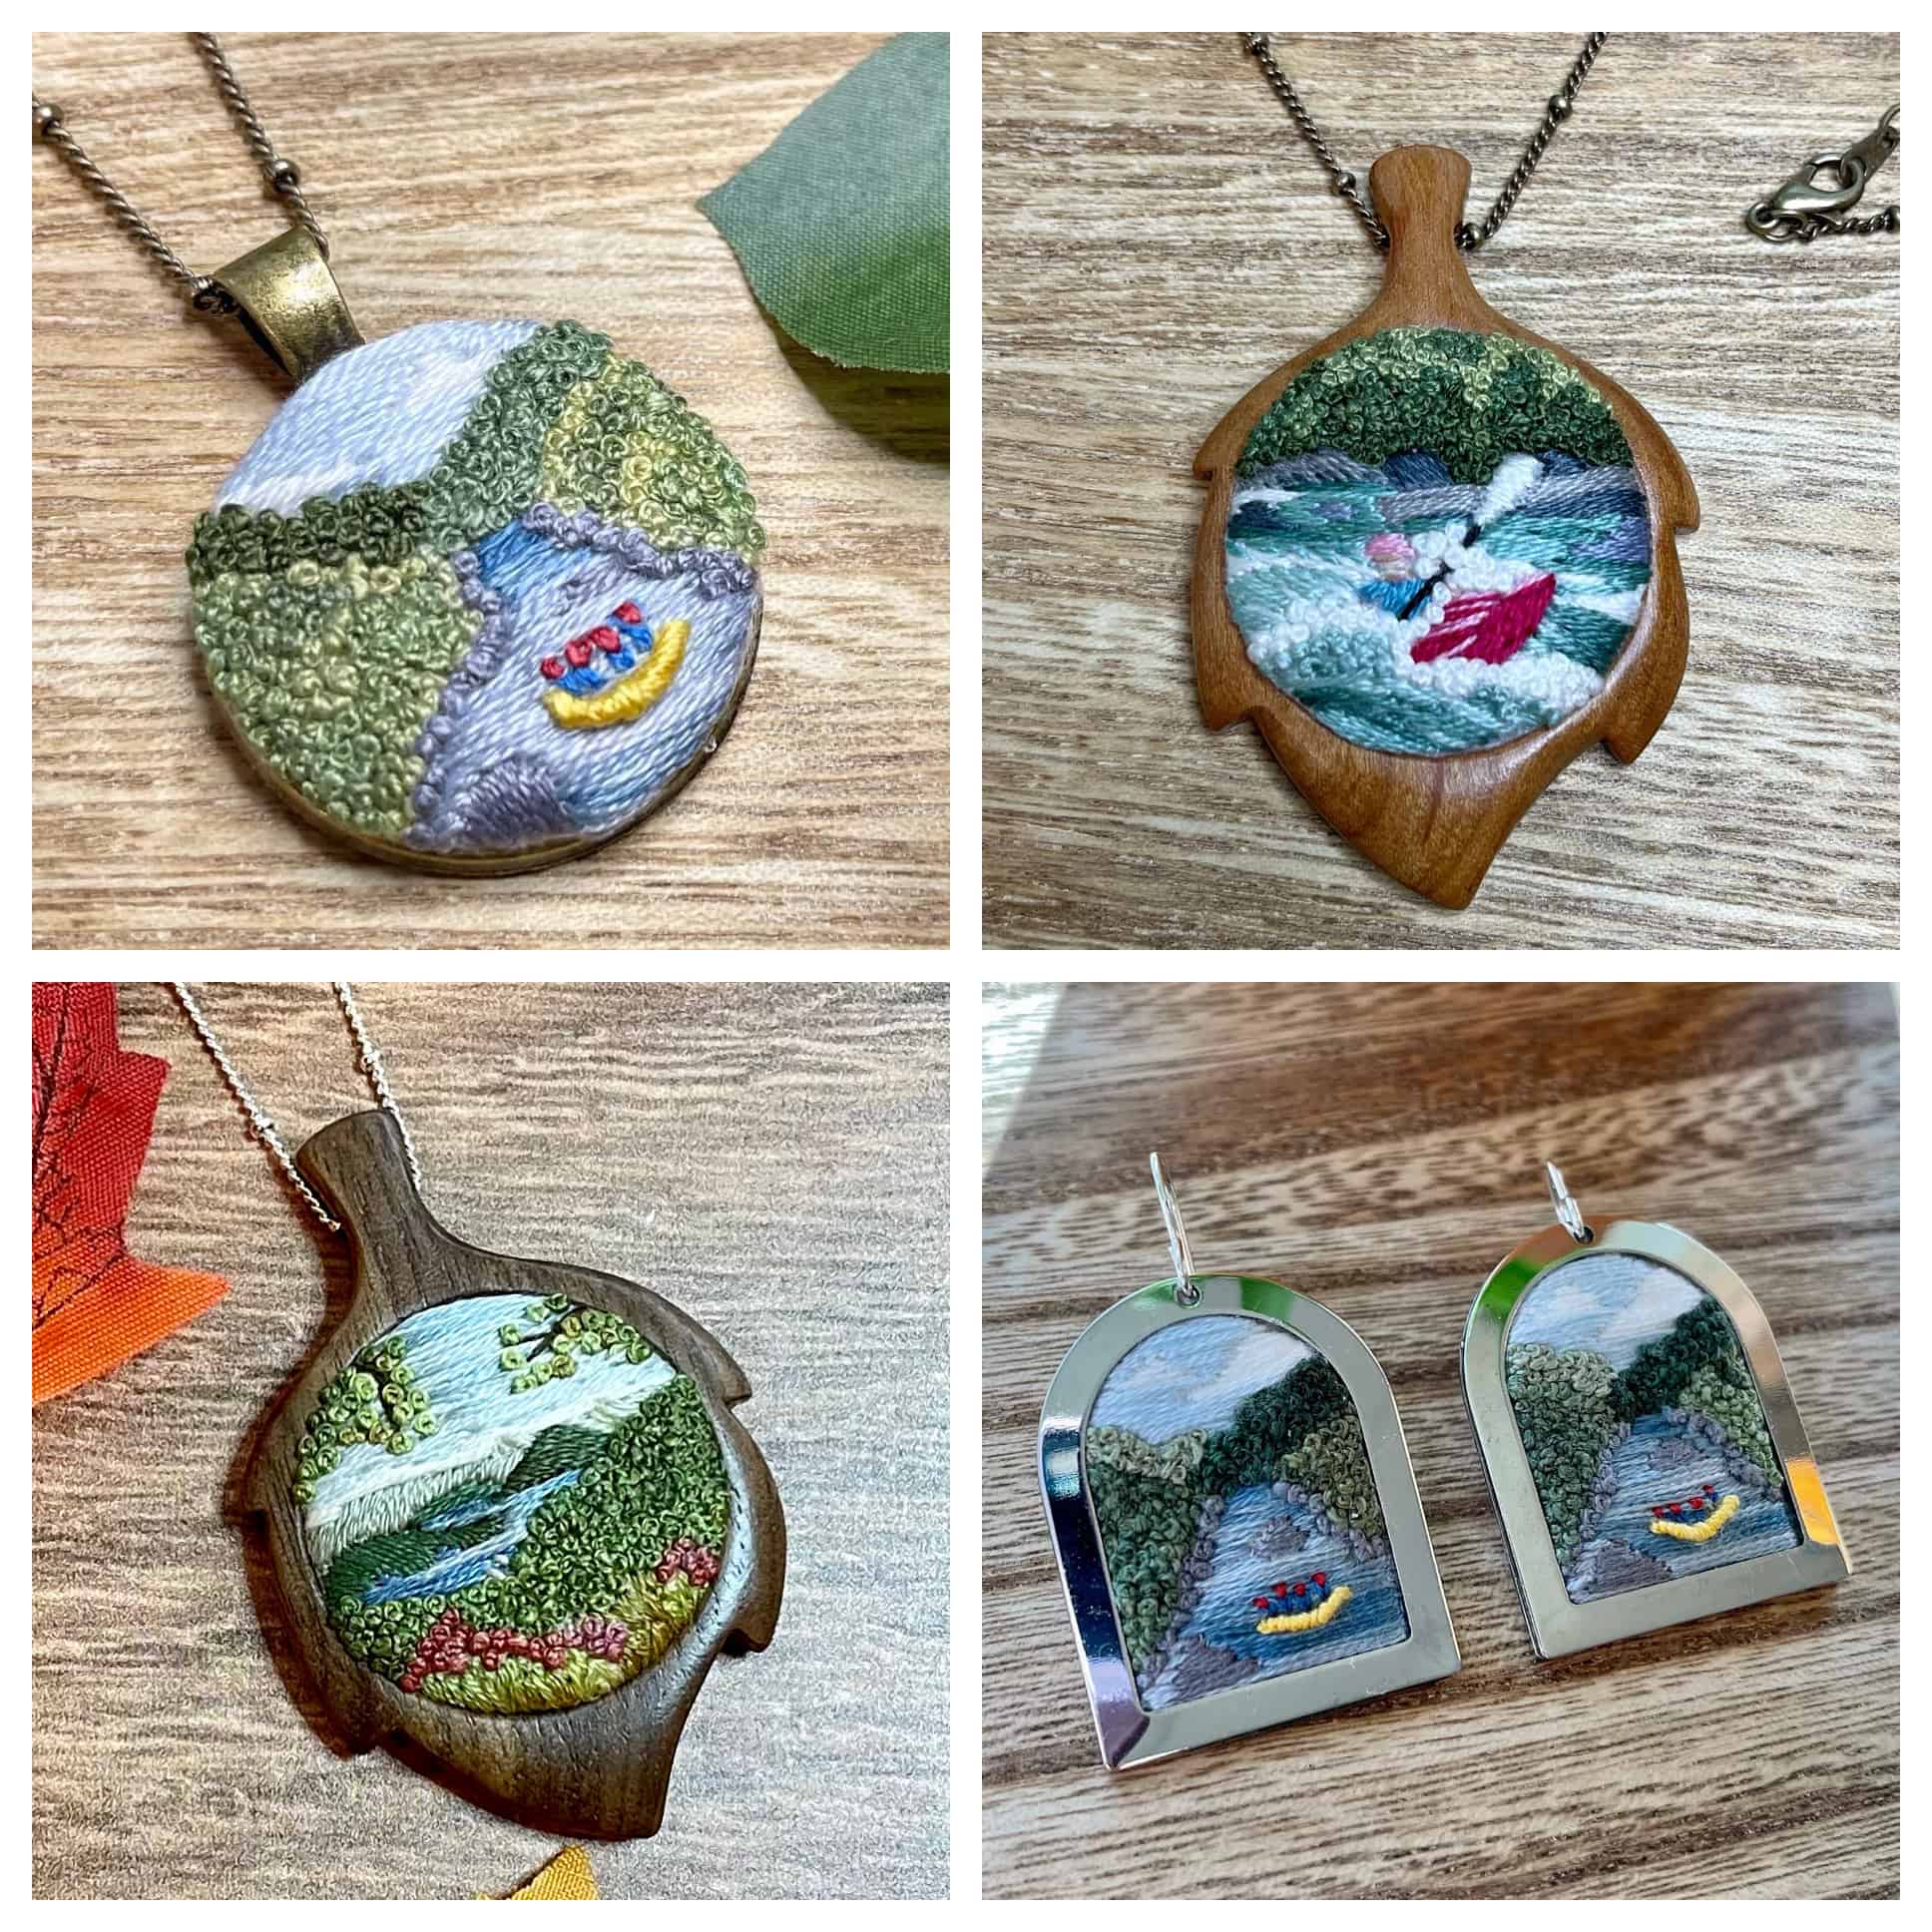 embroidered necklaces and earrings from ocoee threads